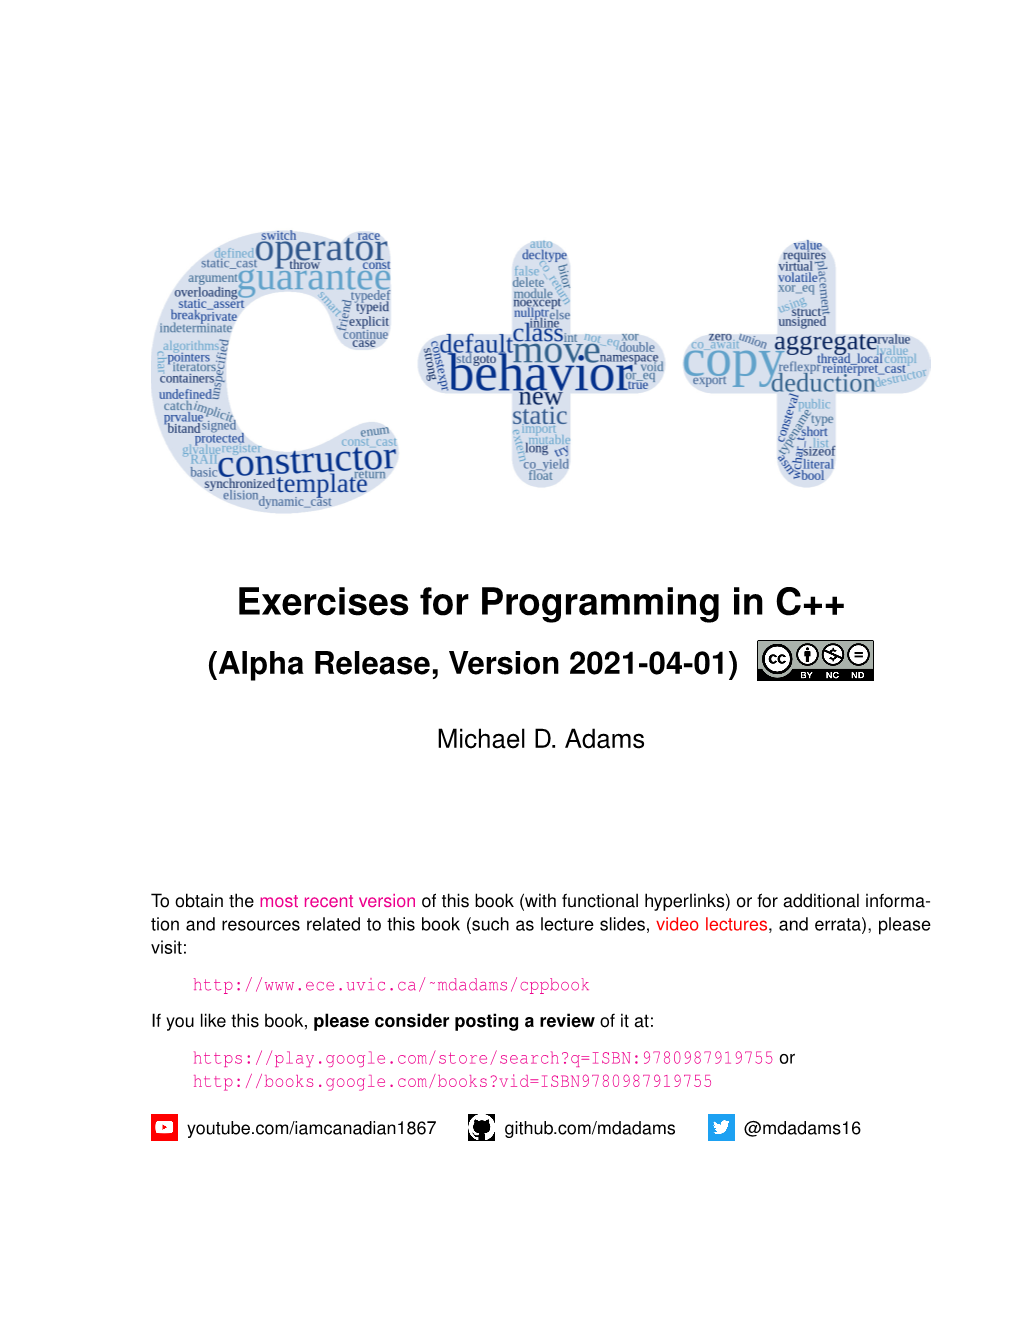 Exercises for Programming in C++ (Alpha Release, Version 2021-04-01)